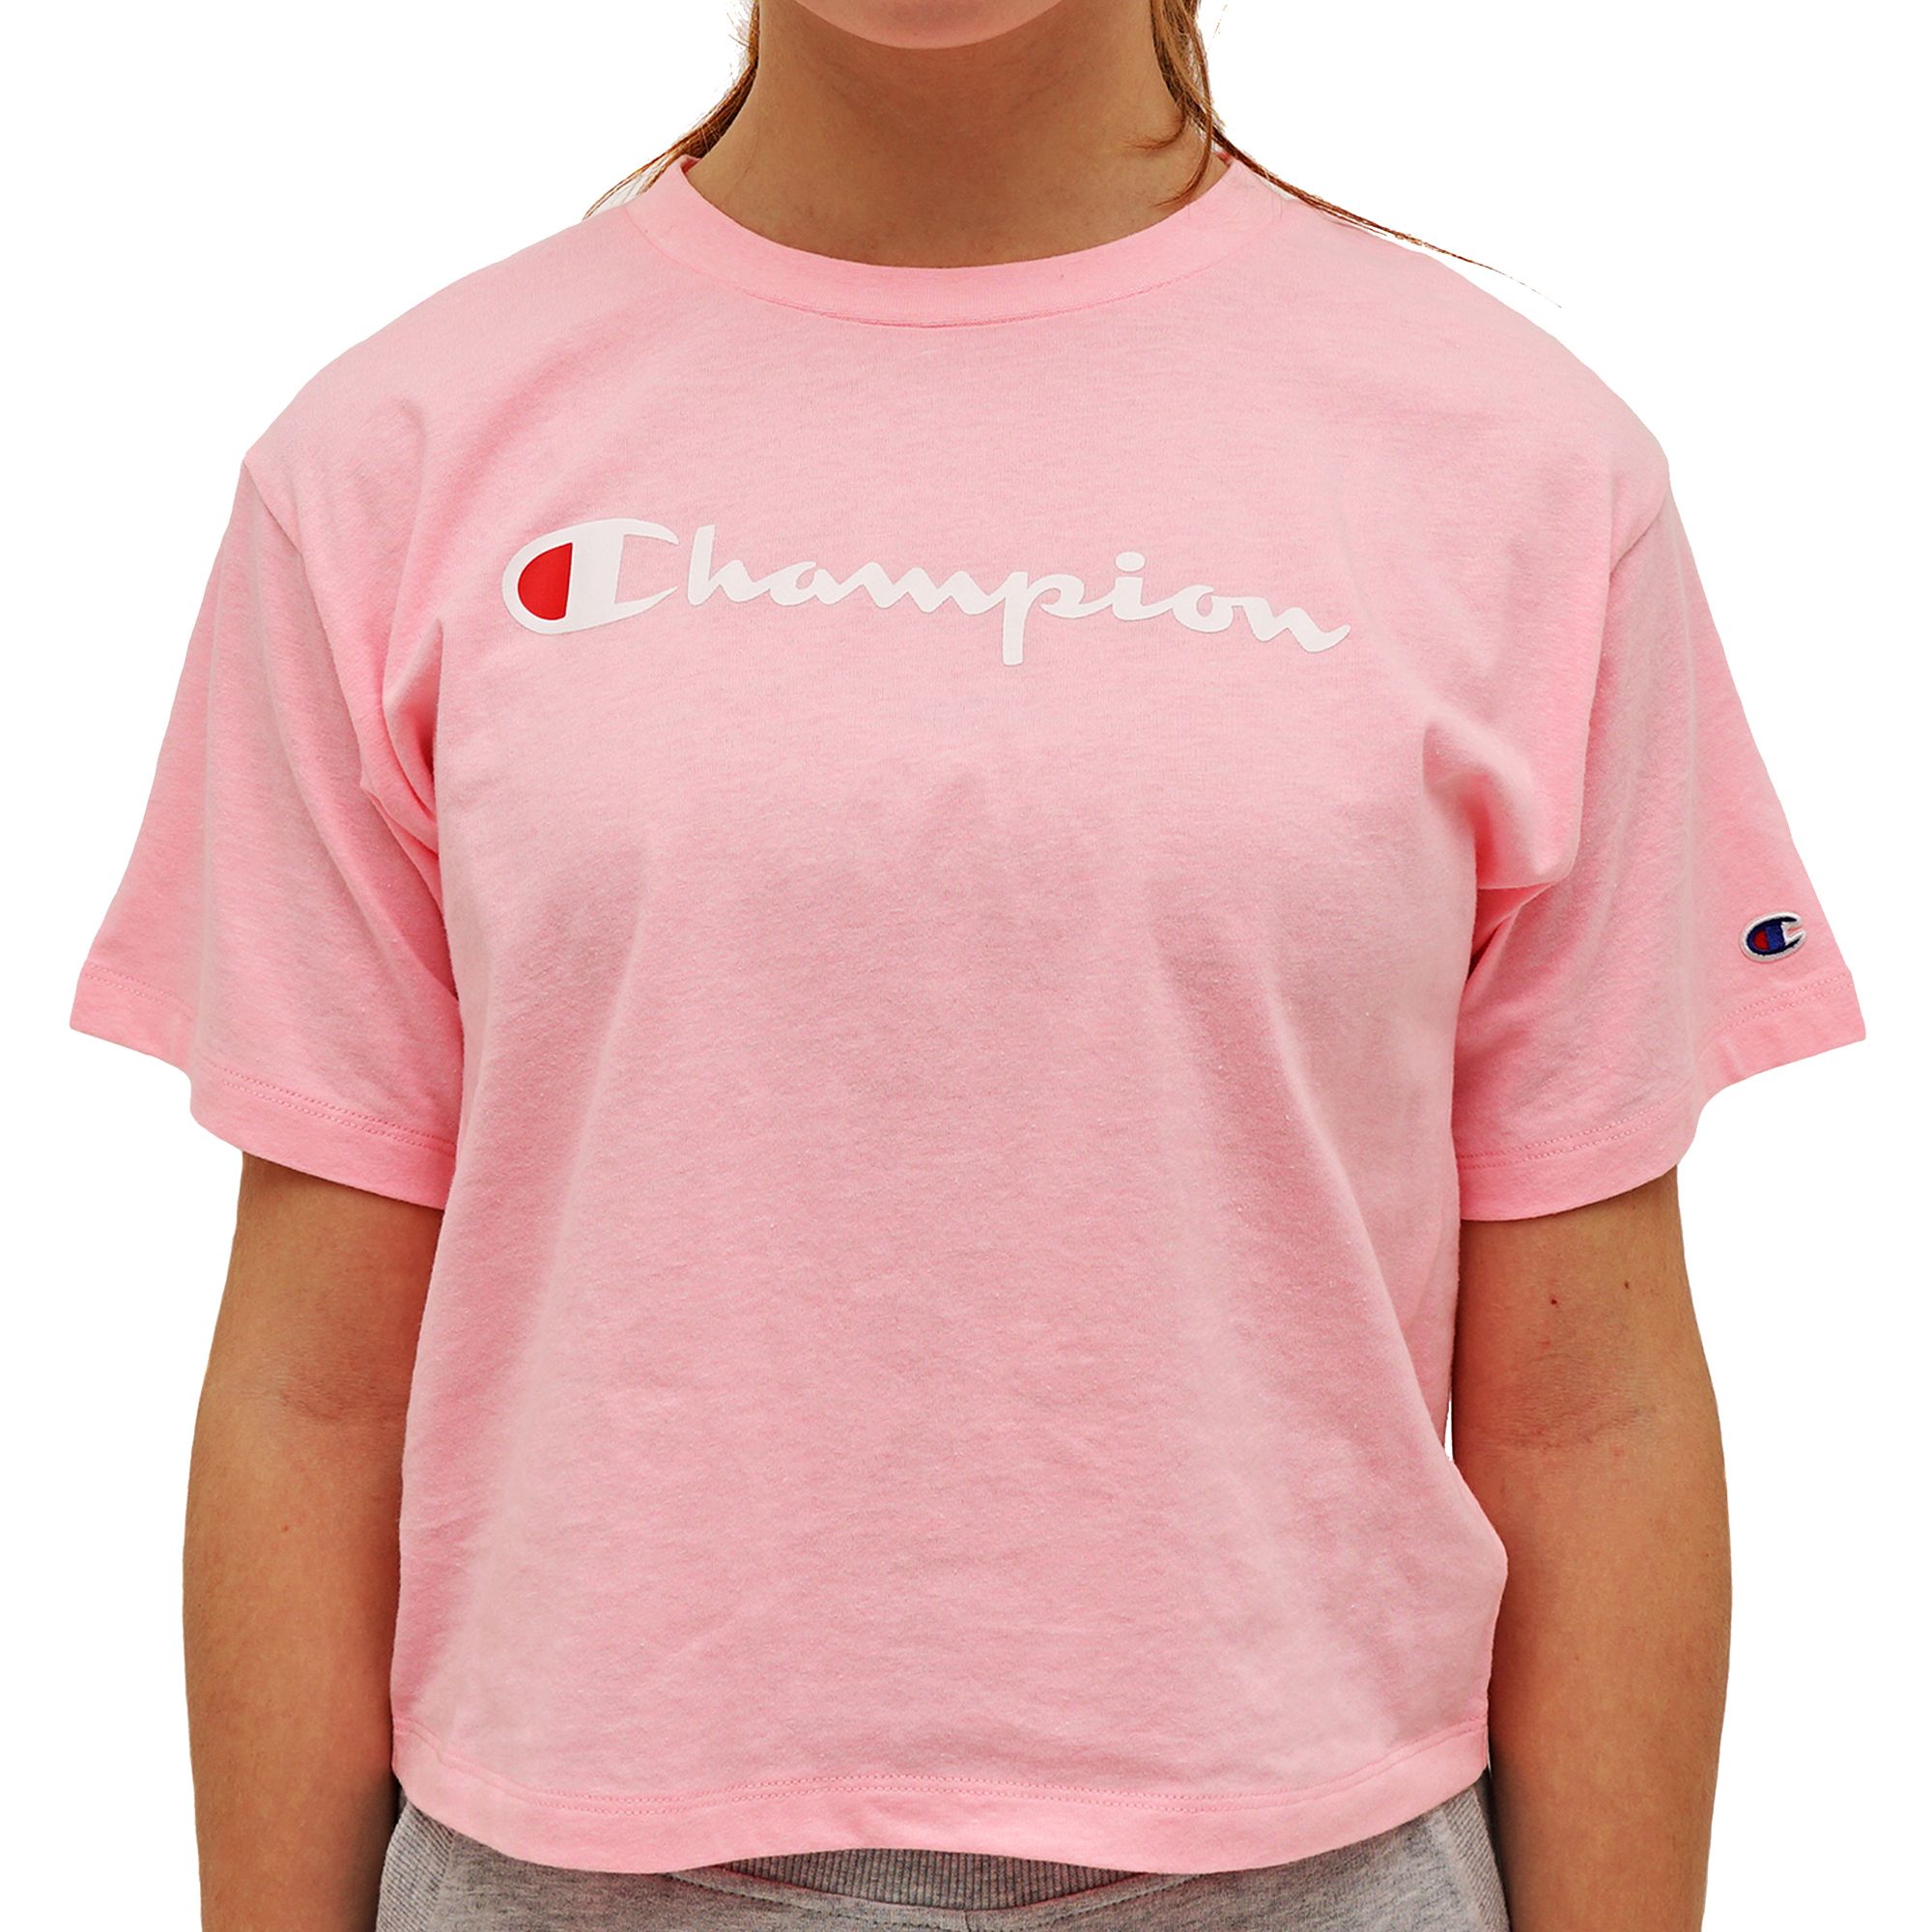 champion tops for girls